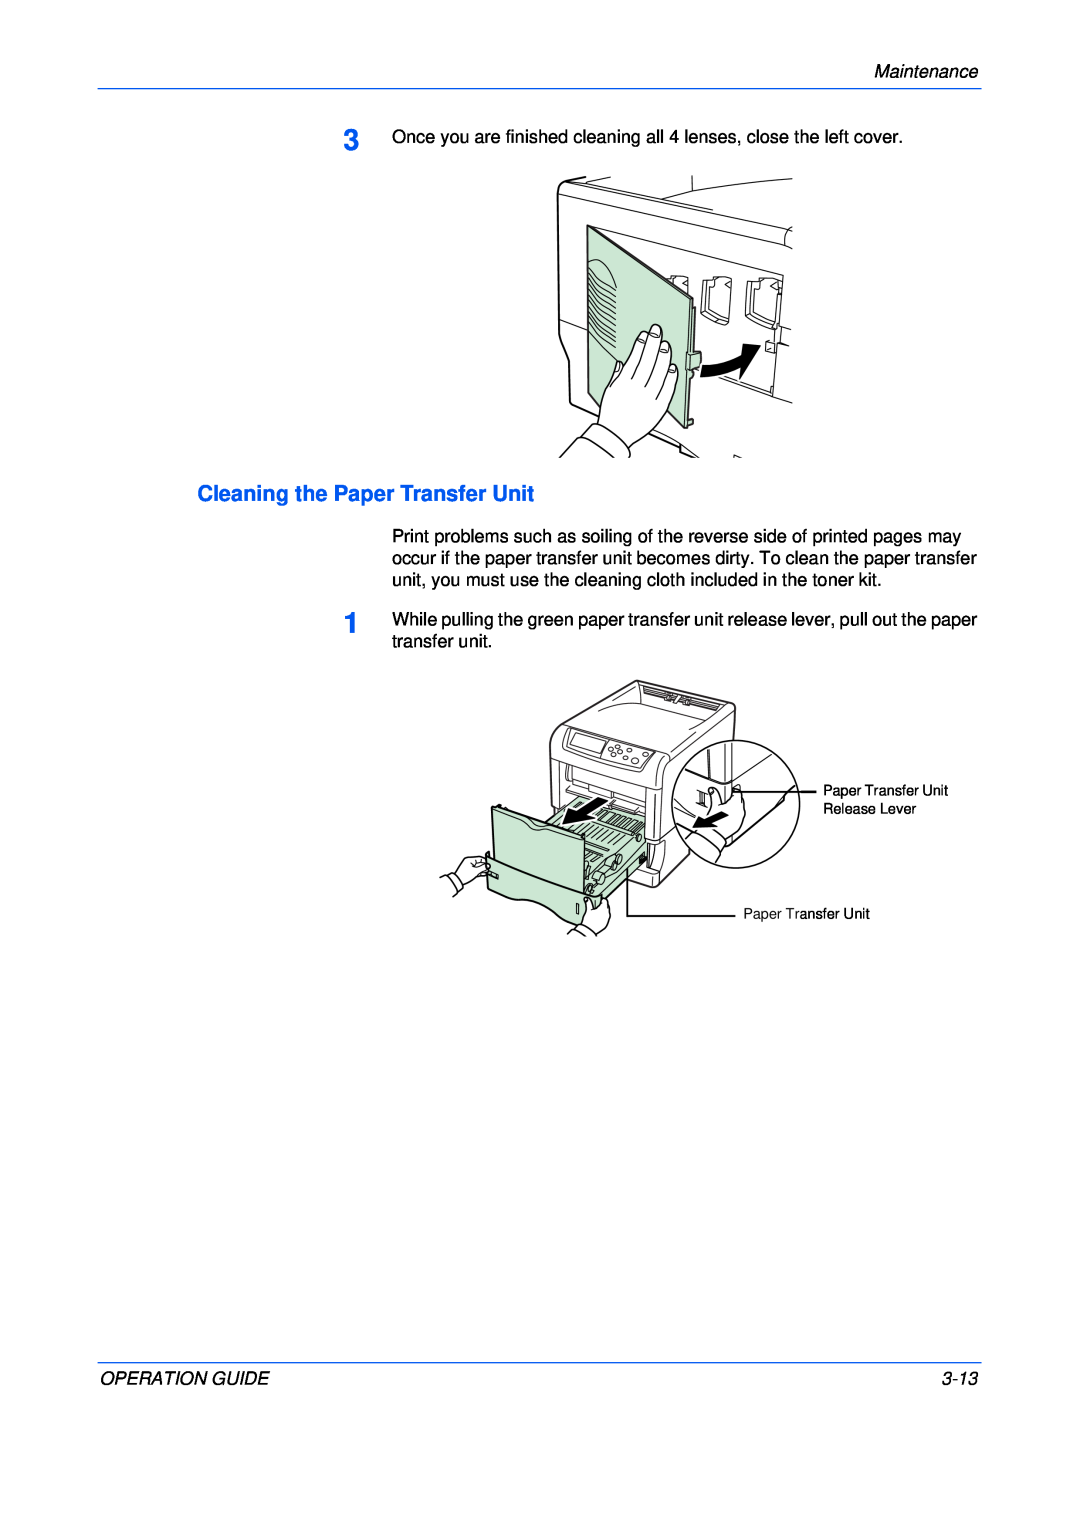 Kyocera FS-C5025N, FS-C5015N manual Cleaning the Paper Transfer Unit, Maintenance, Operation Guide, 3-13 